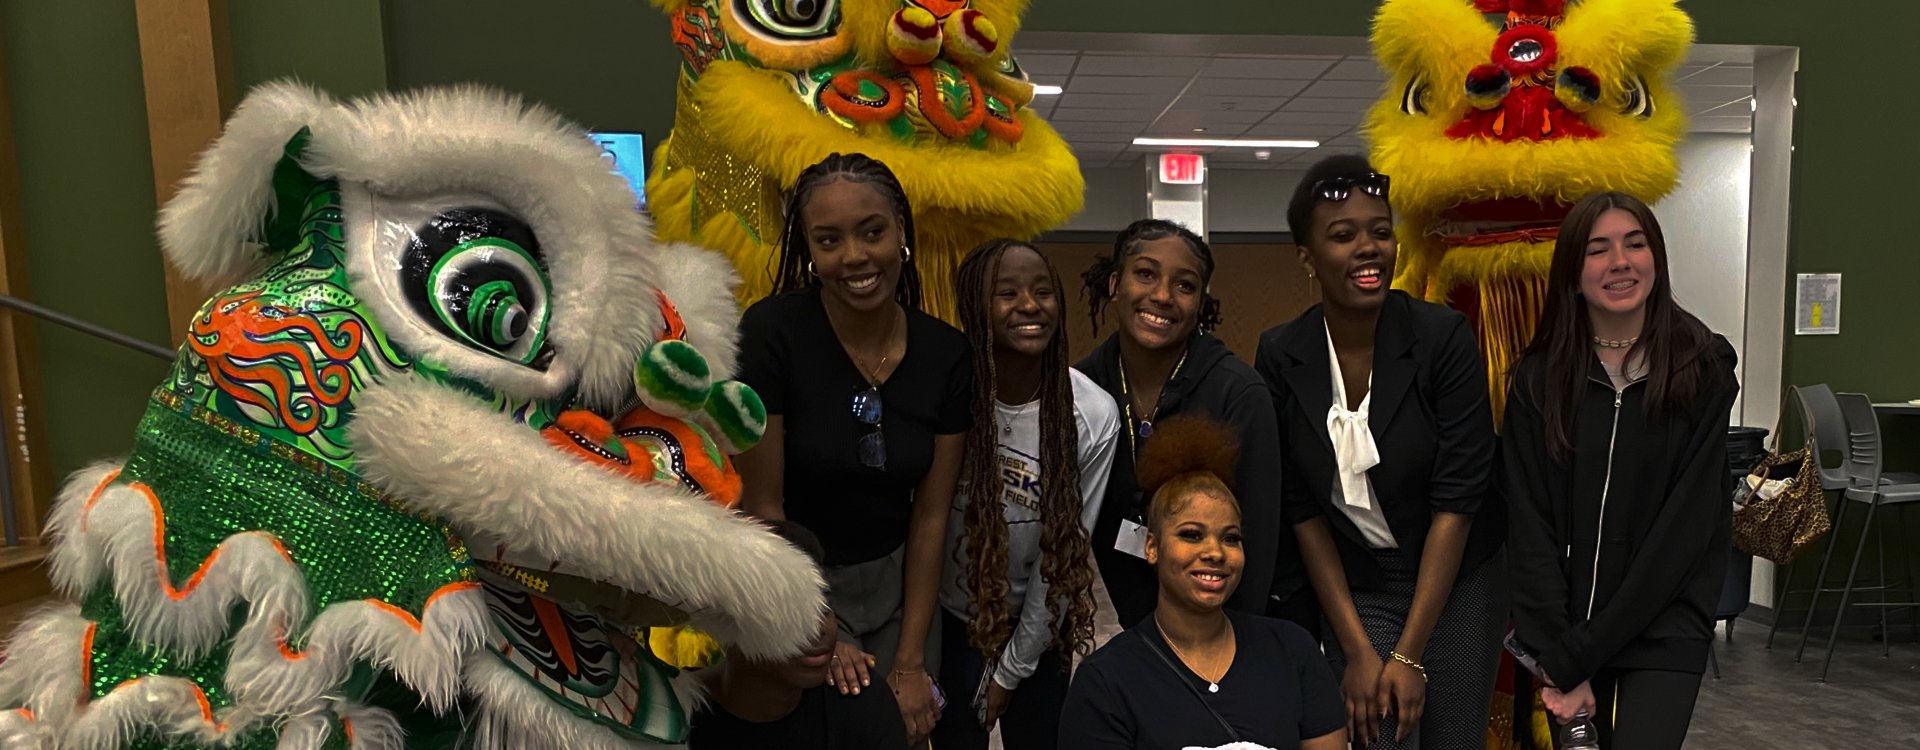 students with decorative dragons at multicultural event